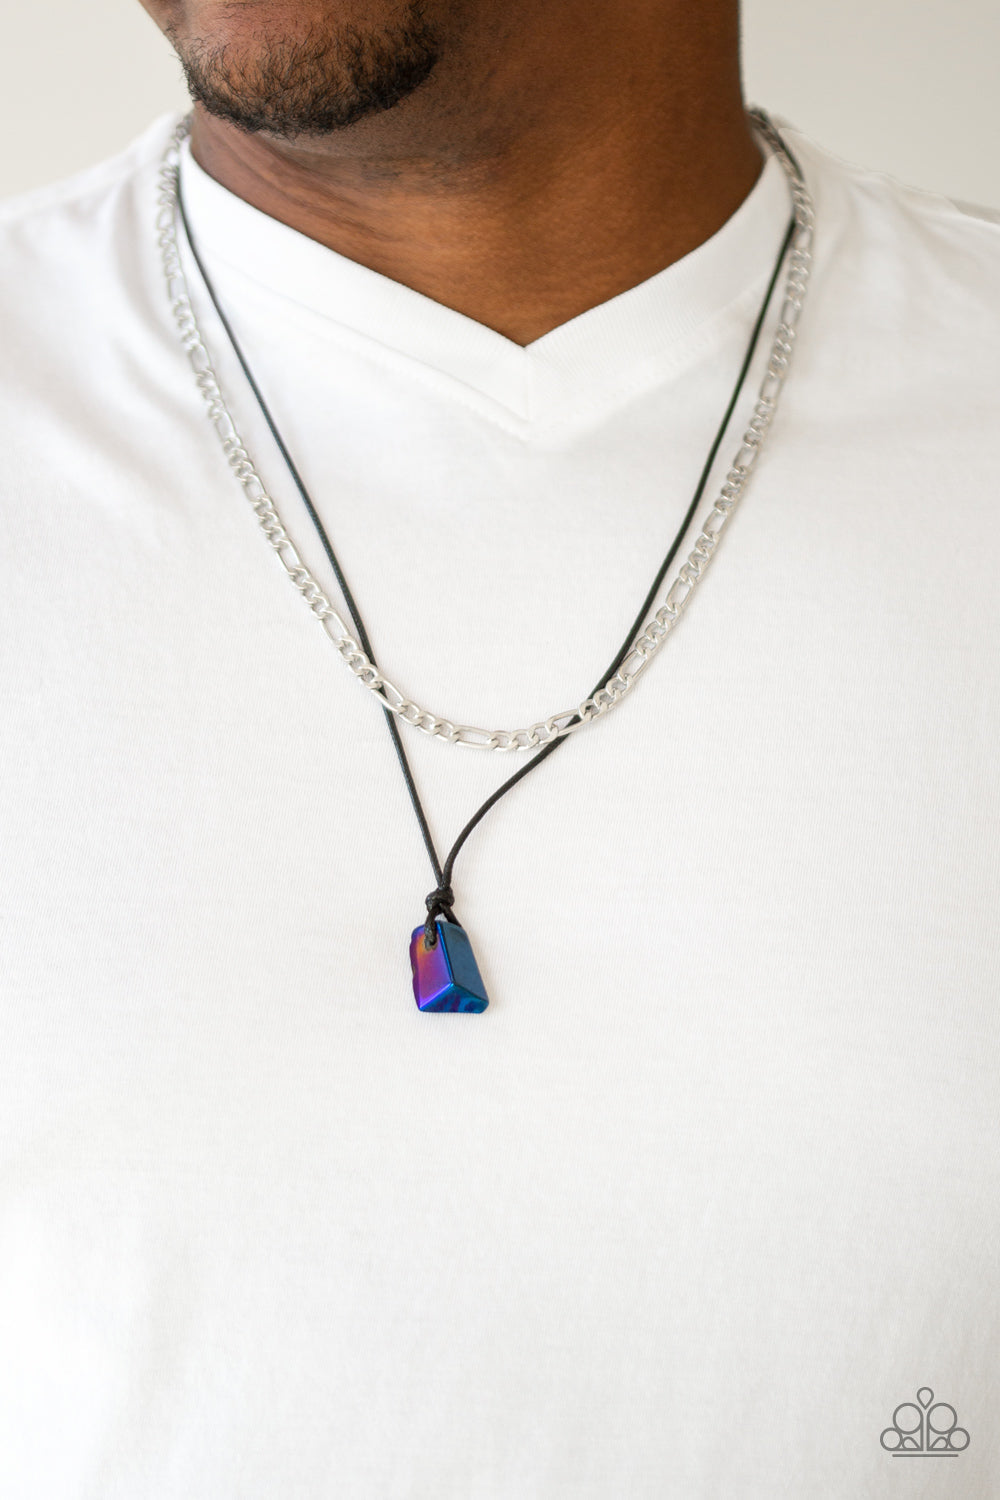 Paparazzi Lookin Slick - Blue - Oil Slick - Silver Chain - Black Cord - Necklace - $5 Jewelry with Ashley Swint